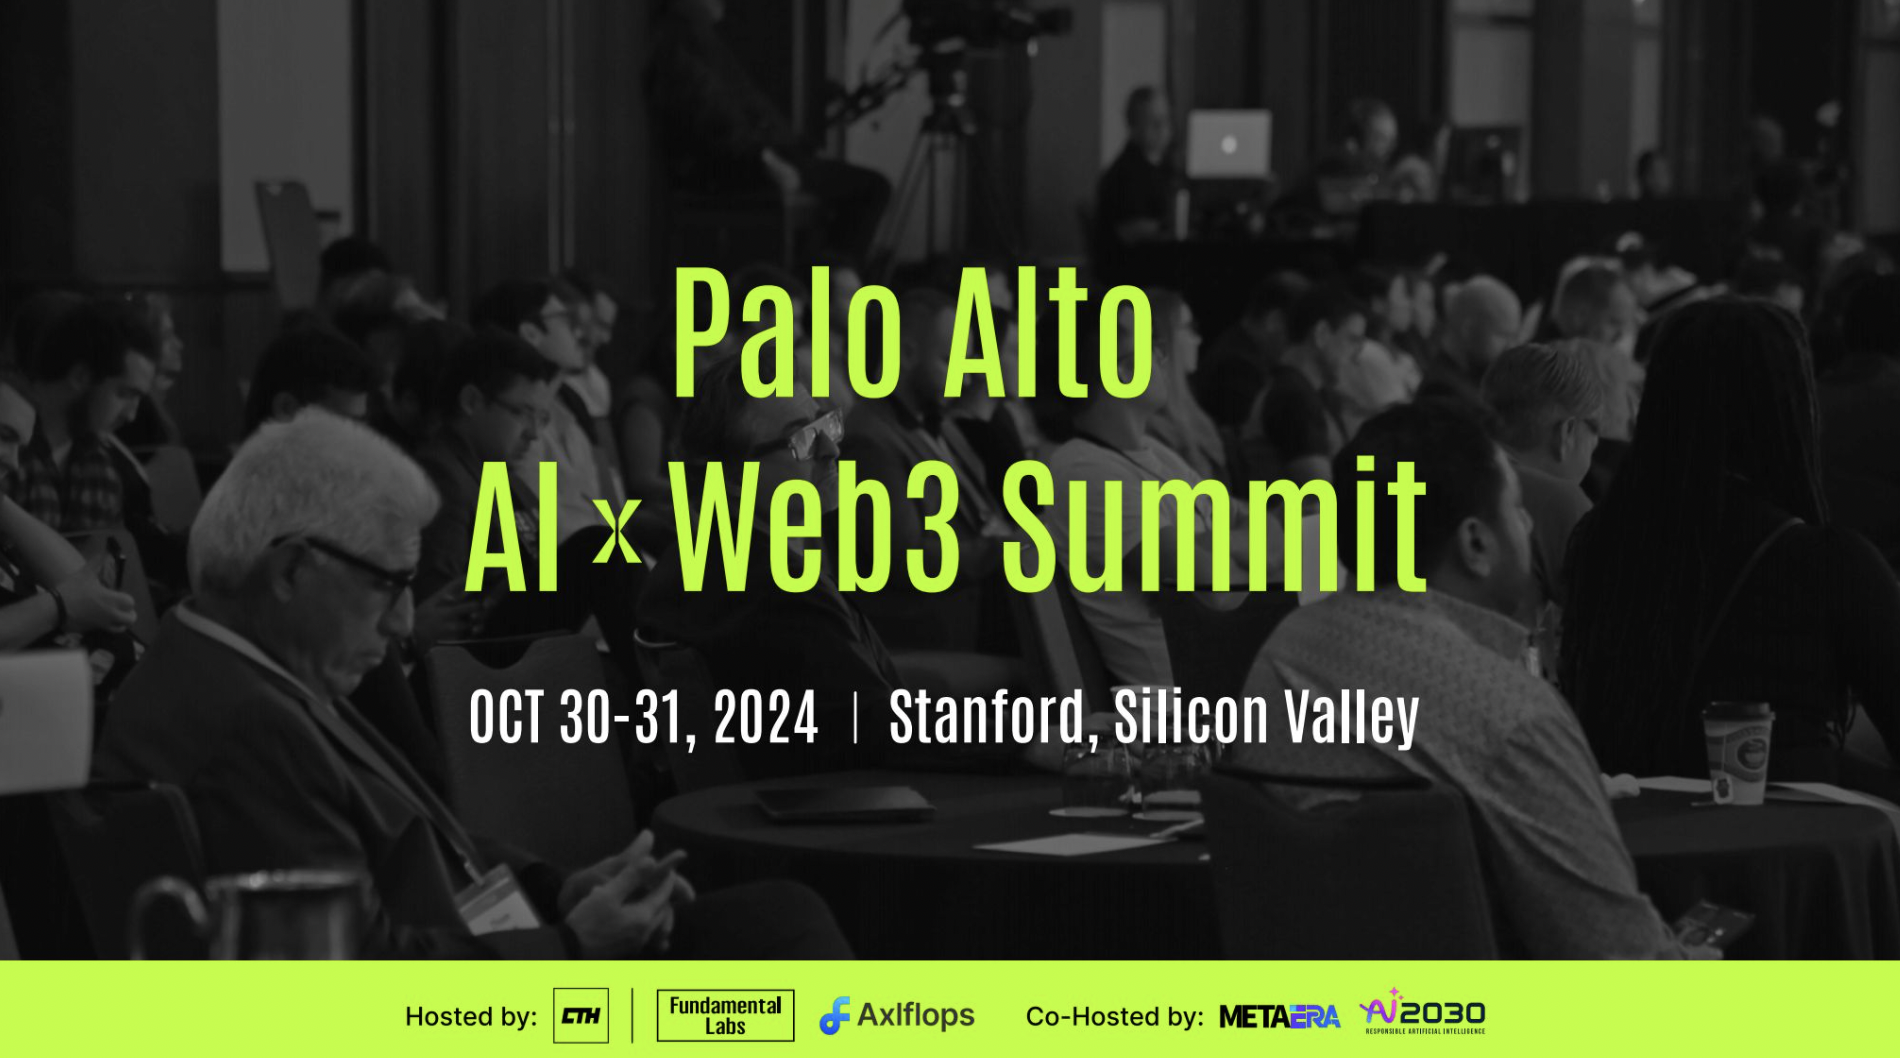 Palo Alto AI x Web3 Summit to Debut at Stanford University This October